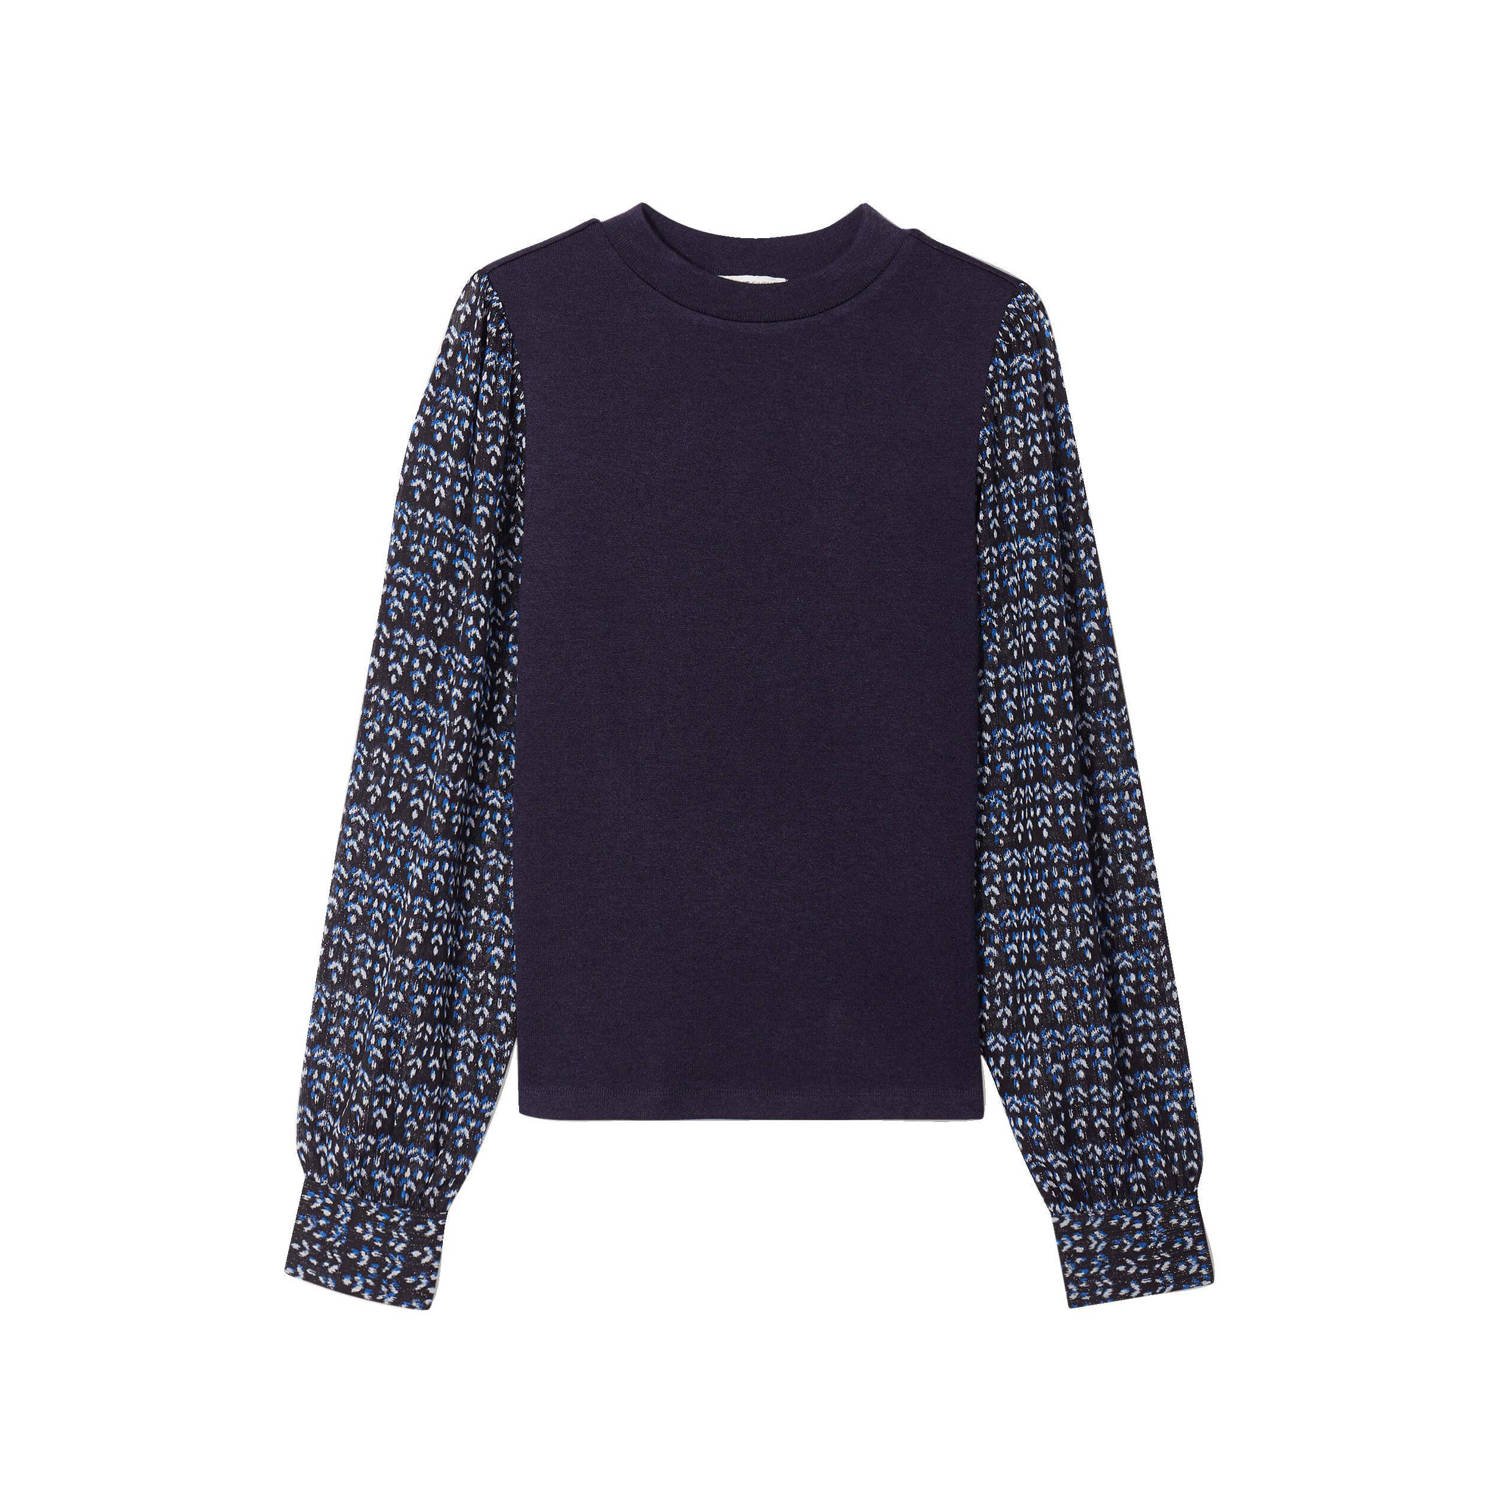 Cache semi-transparante top met all over print en glitters donkerblauw wit